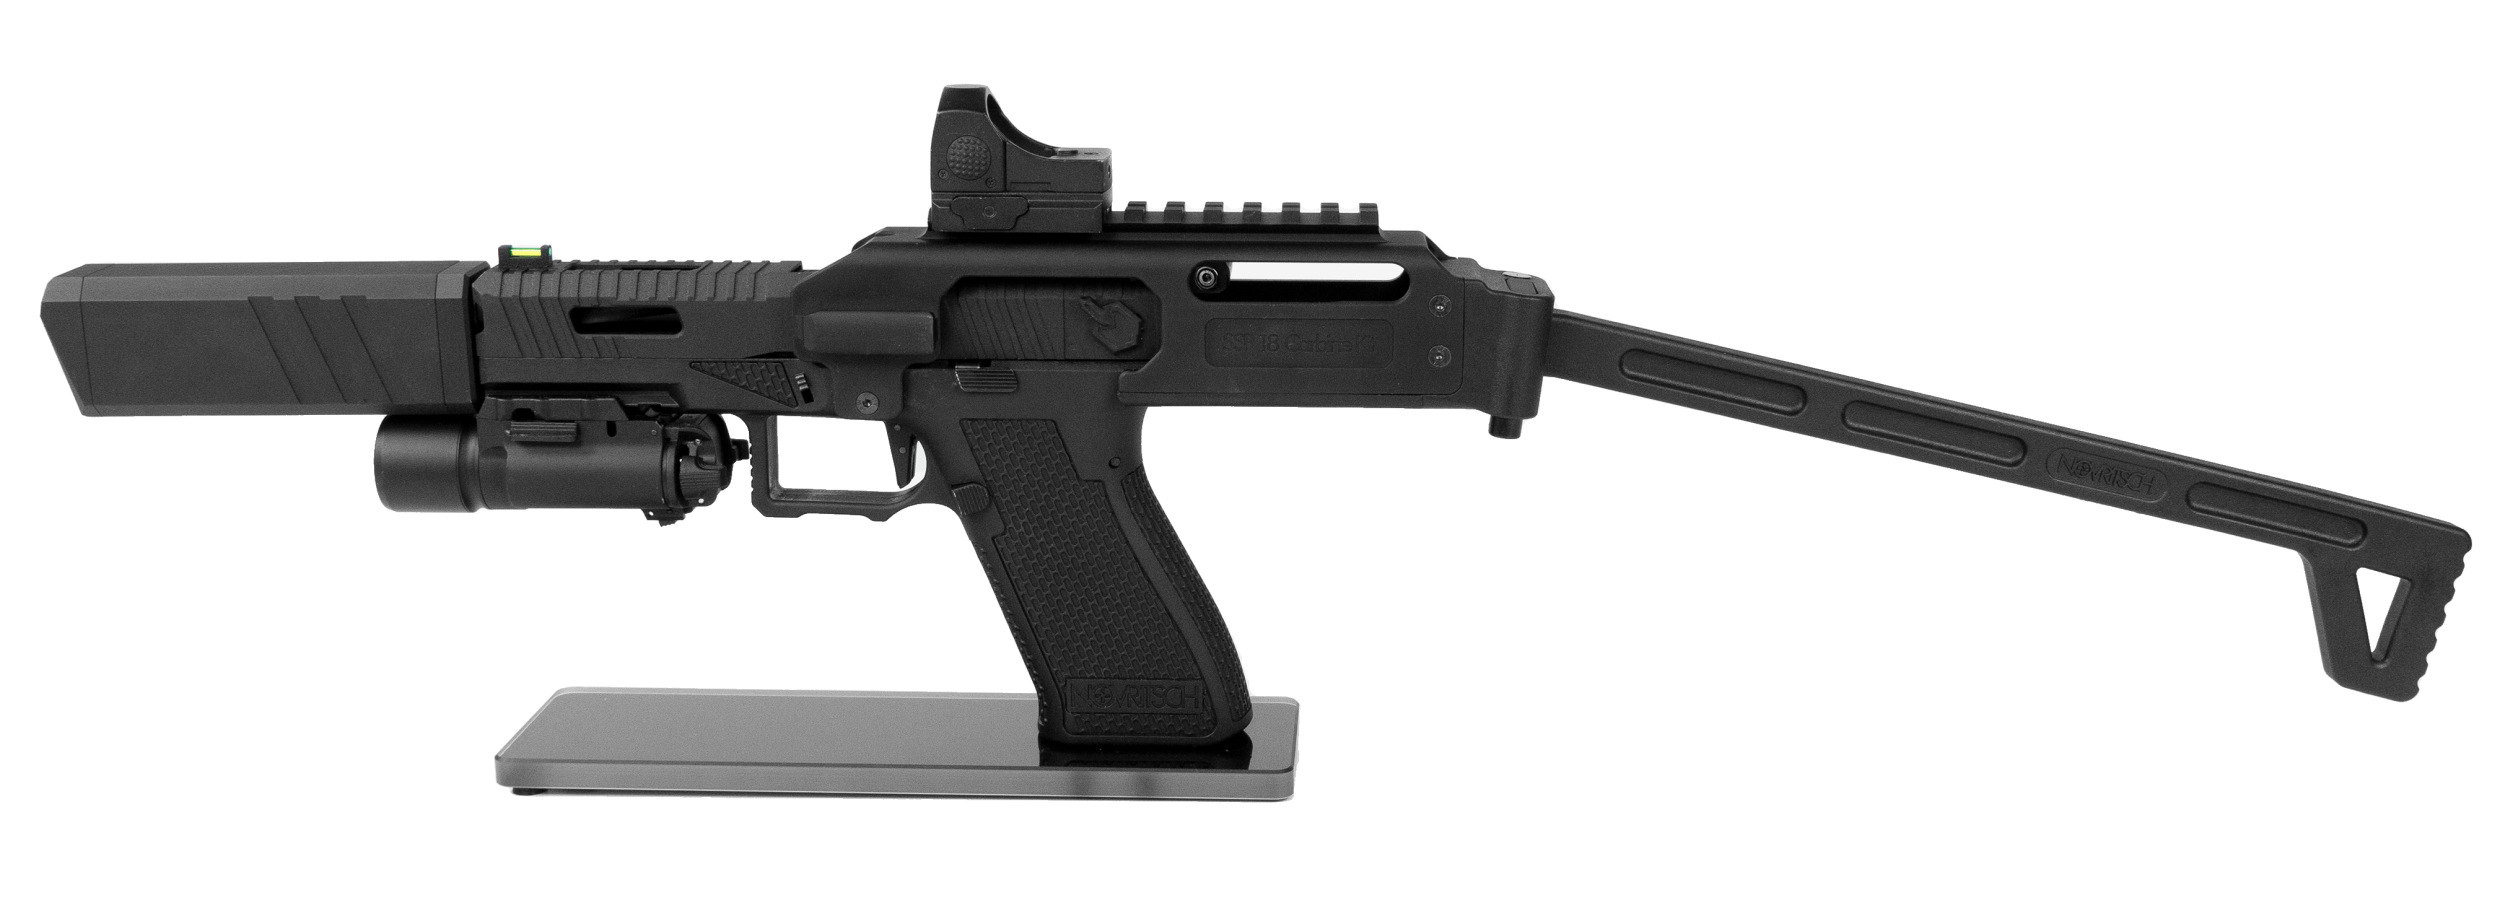 SSP18-Carbine-Kit-Sidearm-on-another-level_1.png